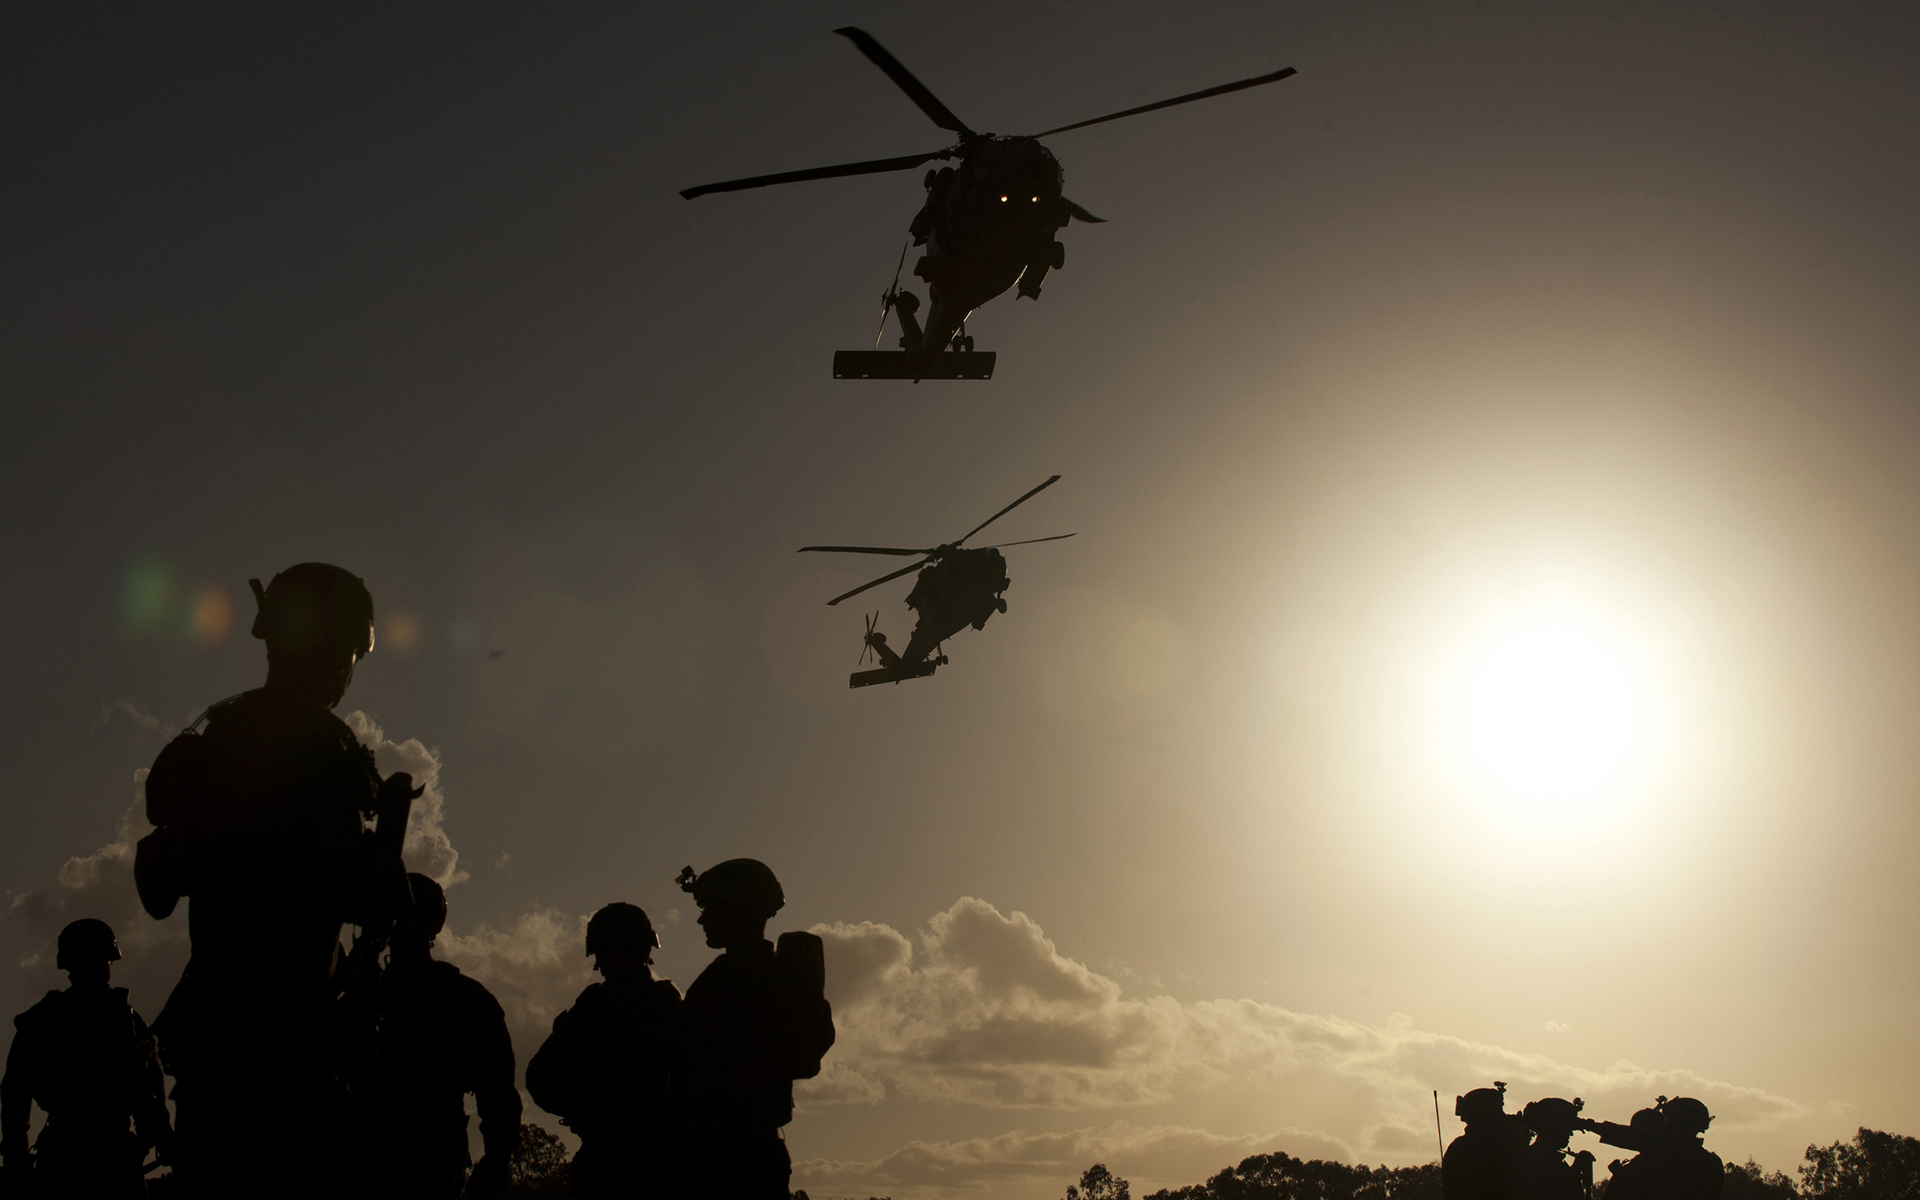 soldiers, Helicopters, Sunlight, Silhouette, Military Wallpaper